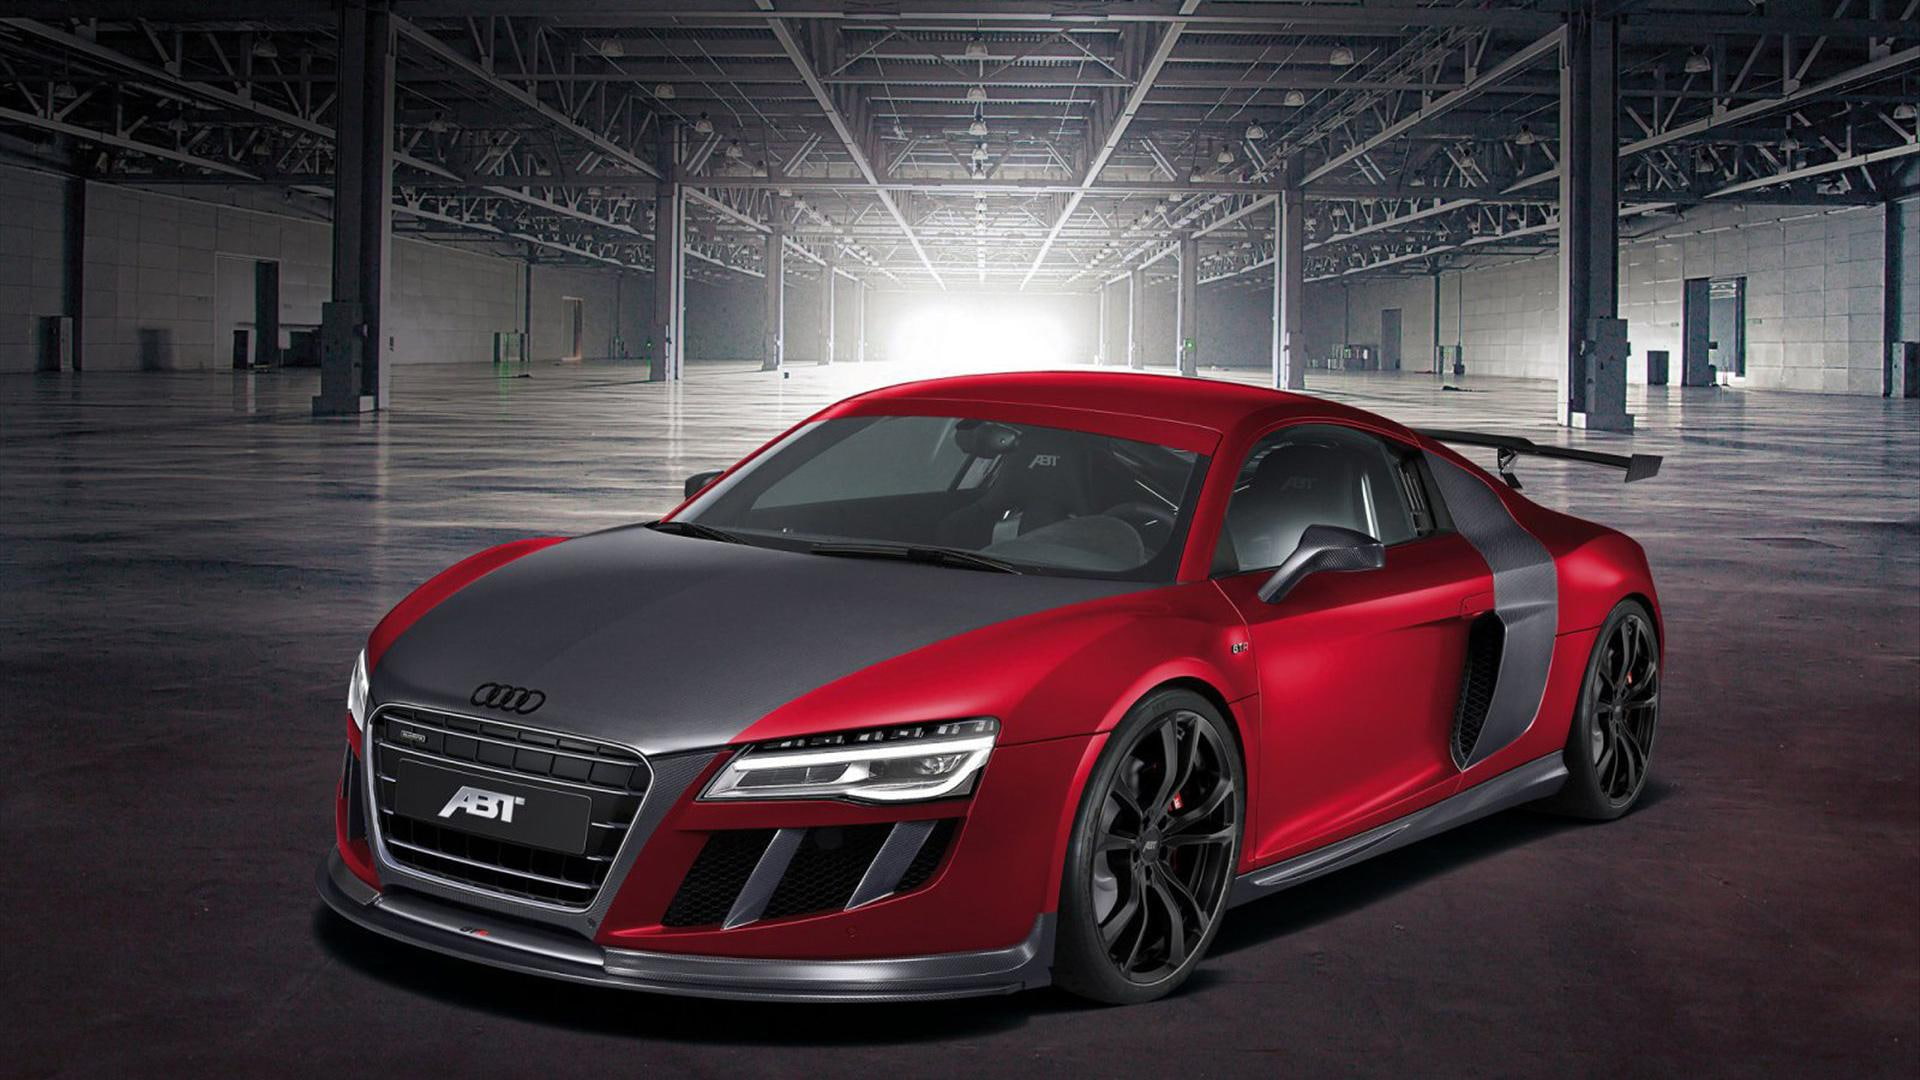 ABT Audi R8 GTR 2013, red and black audi coupe, cars